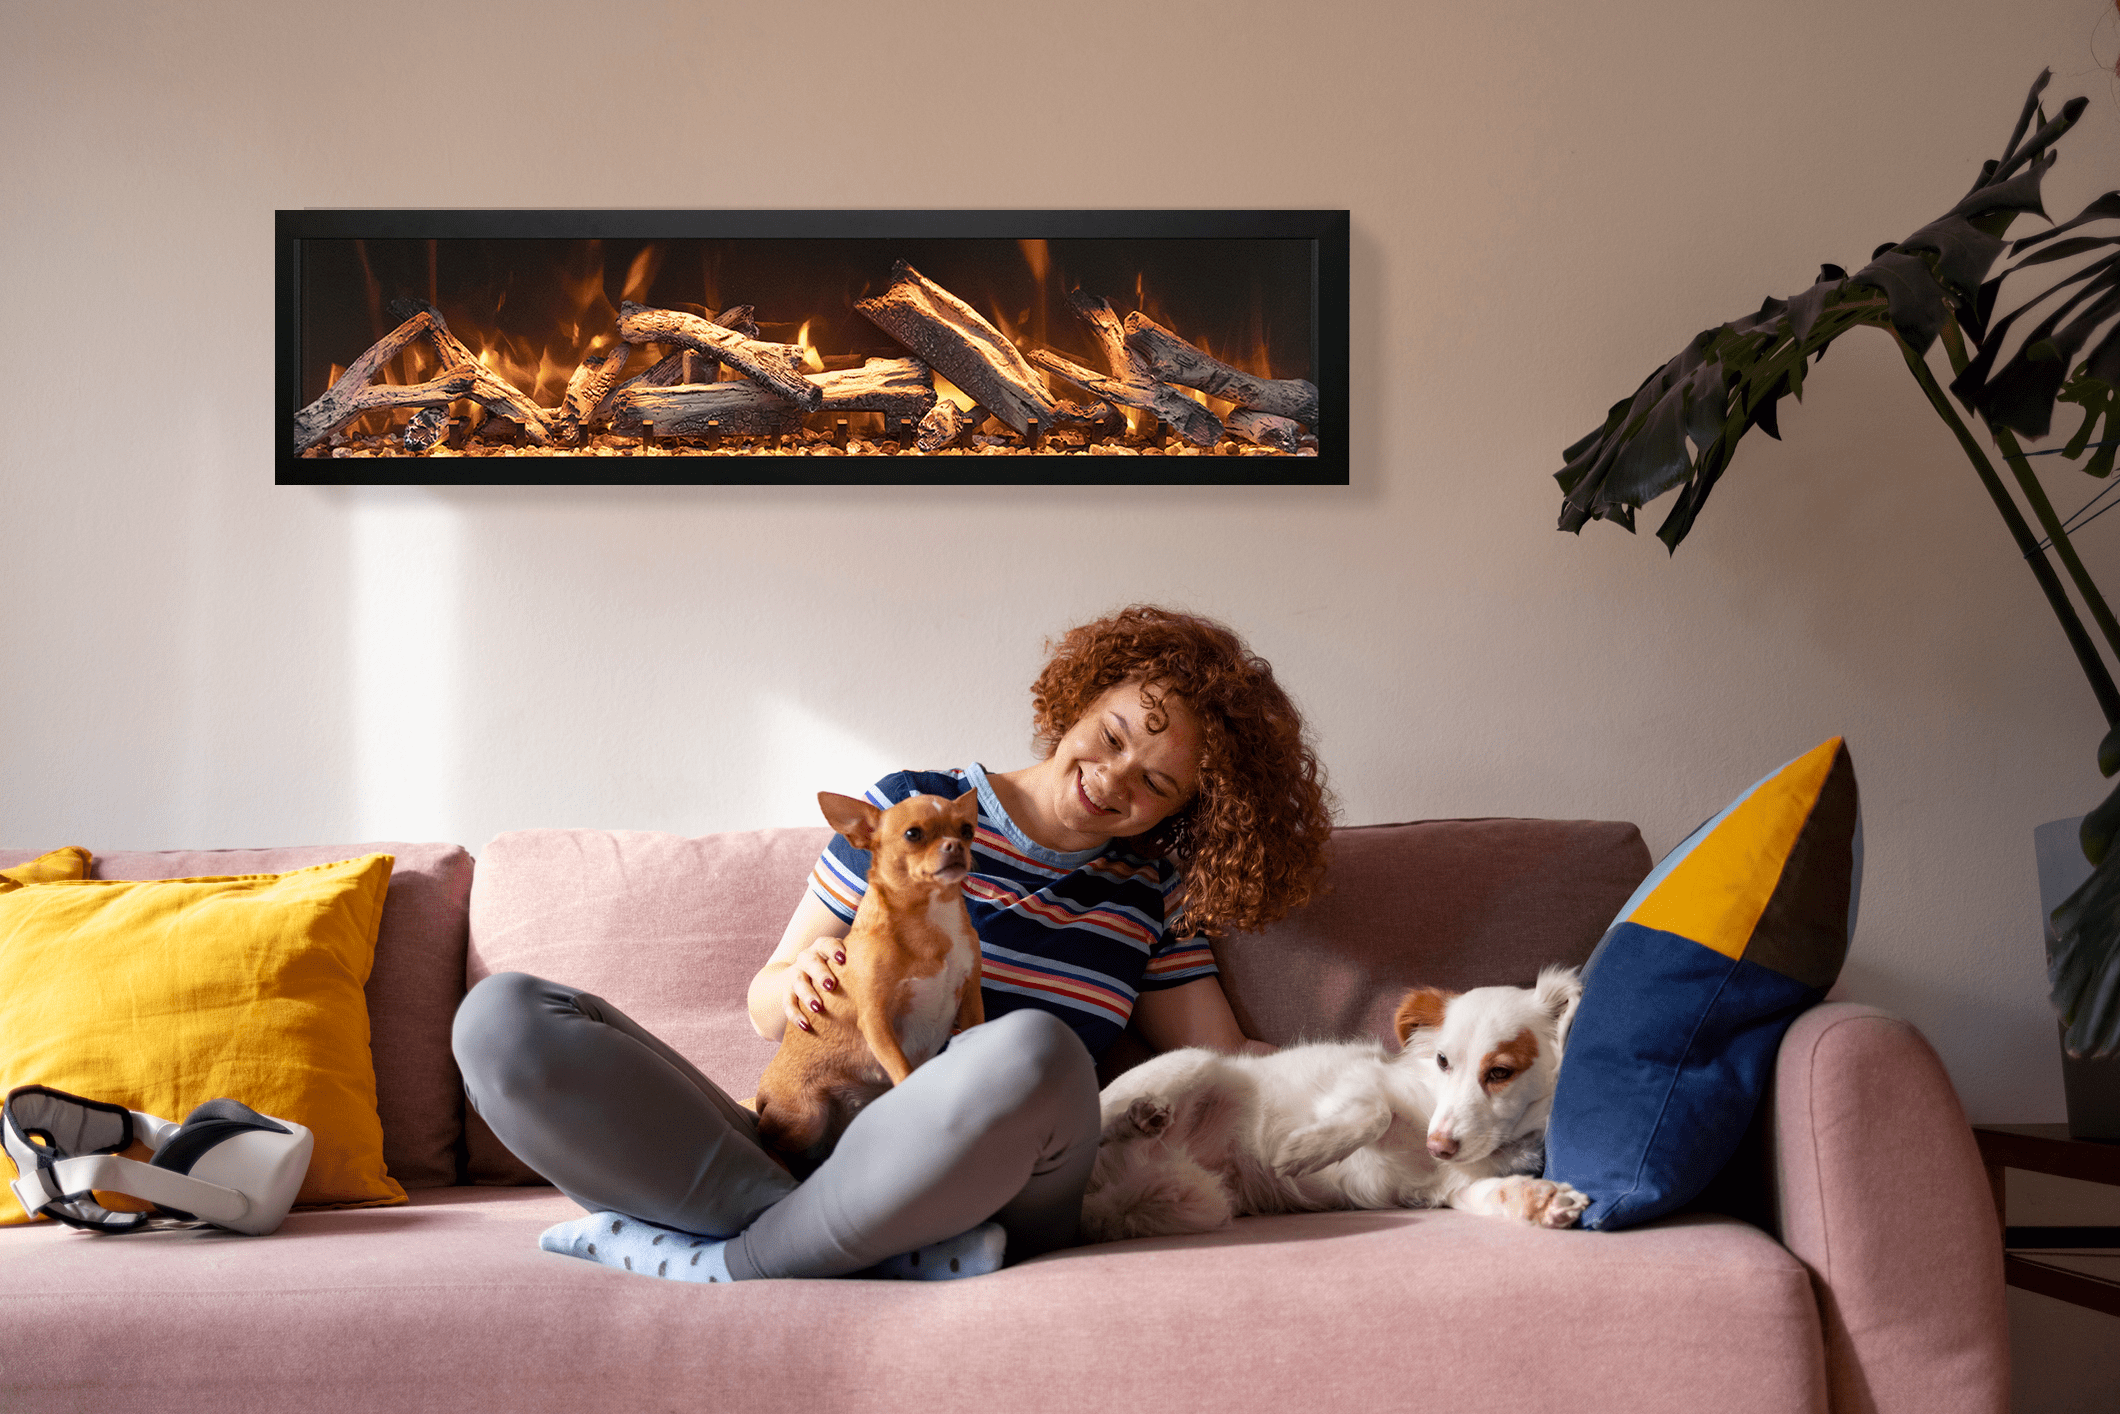 Remii by Amantii 45" Deep Series Built-in Electric Fireplace with Black Steel Surround- 102745-DE- Lifestyle Living Room White Wall